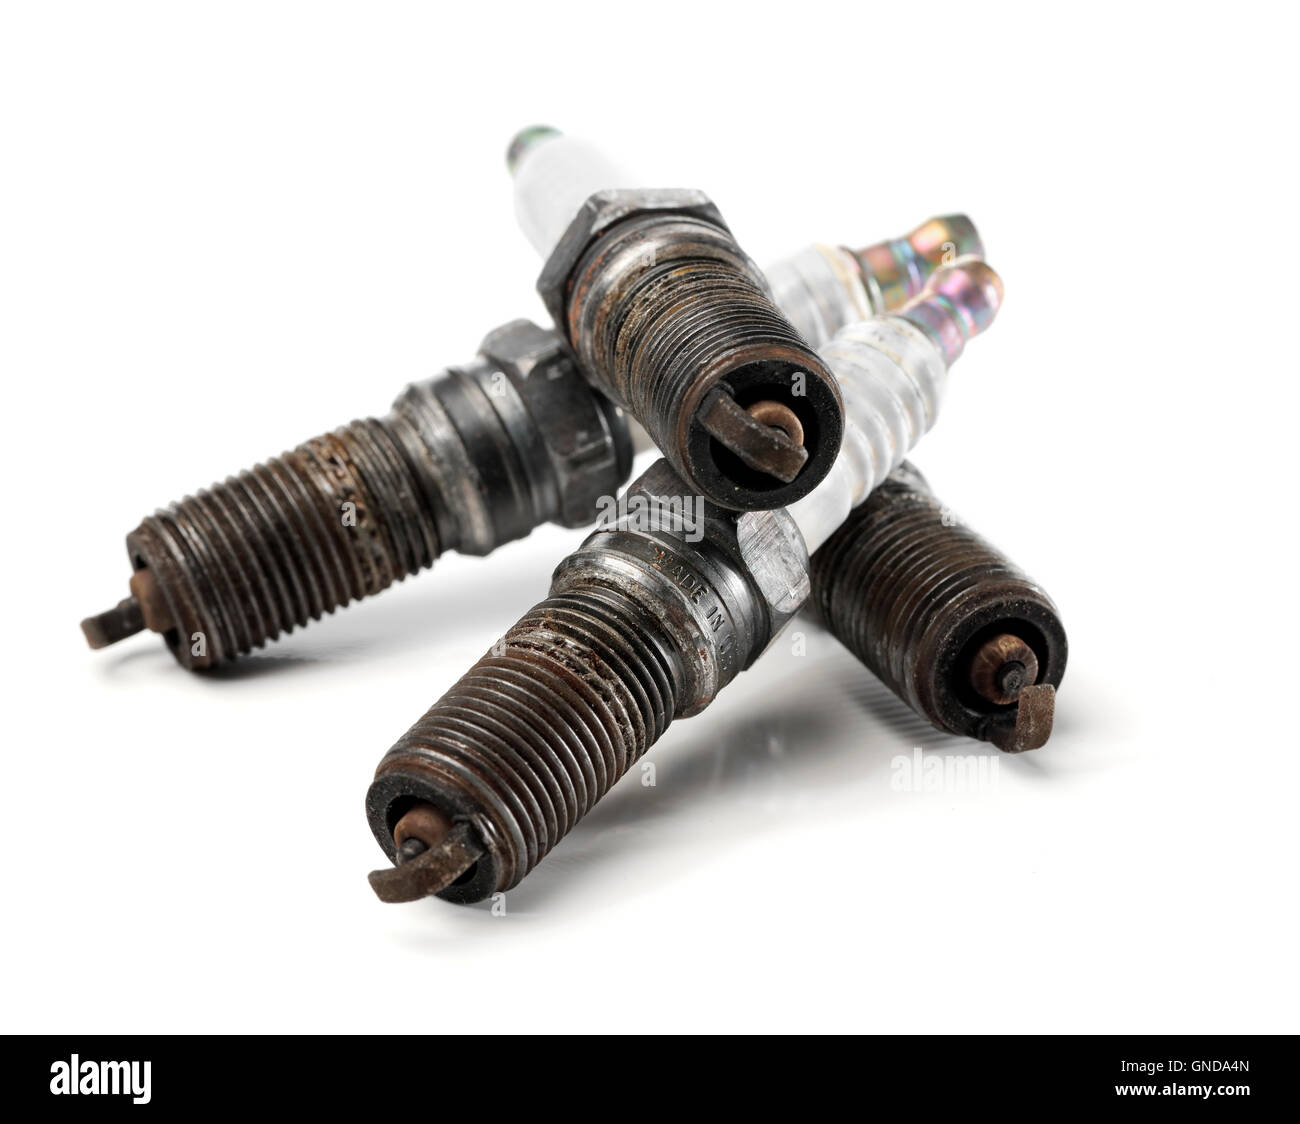 Four used, worn and dirty spark plugs from a car. Stock Photo